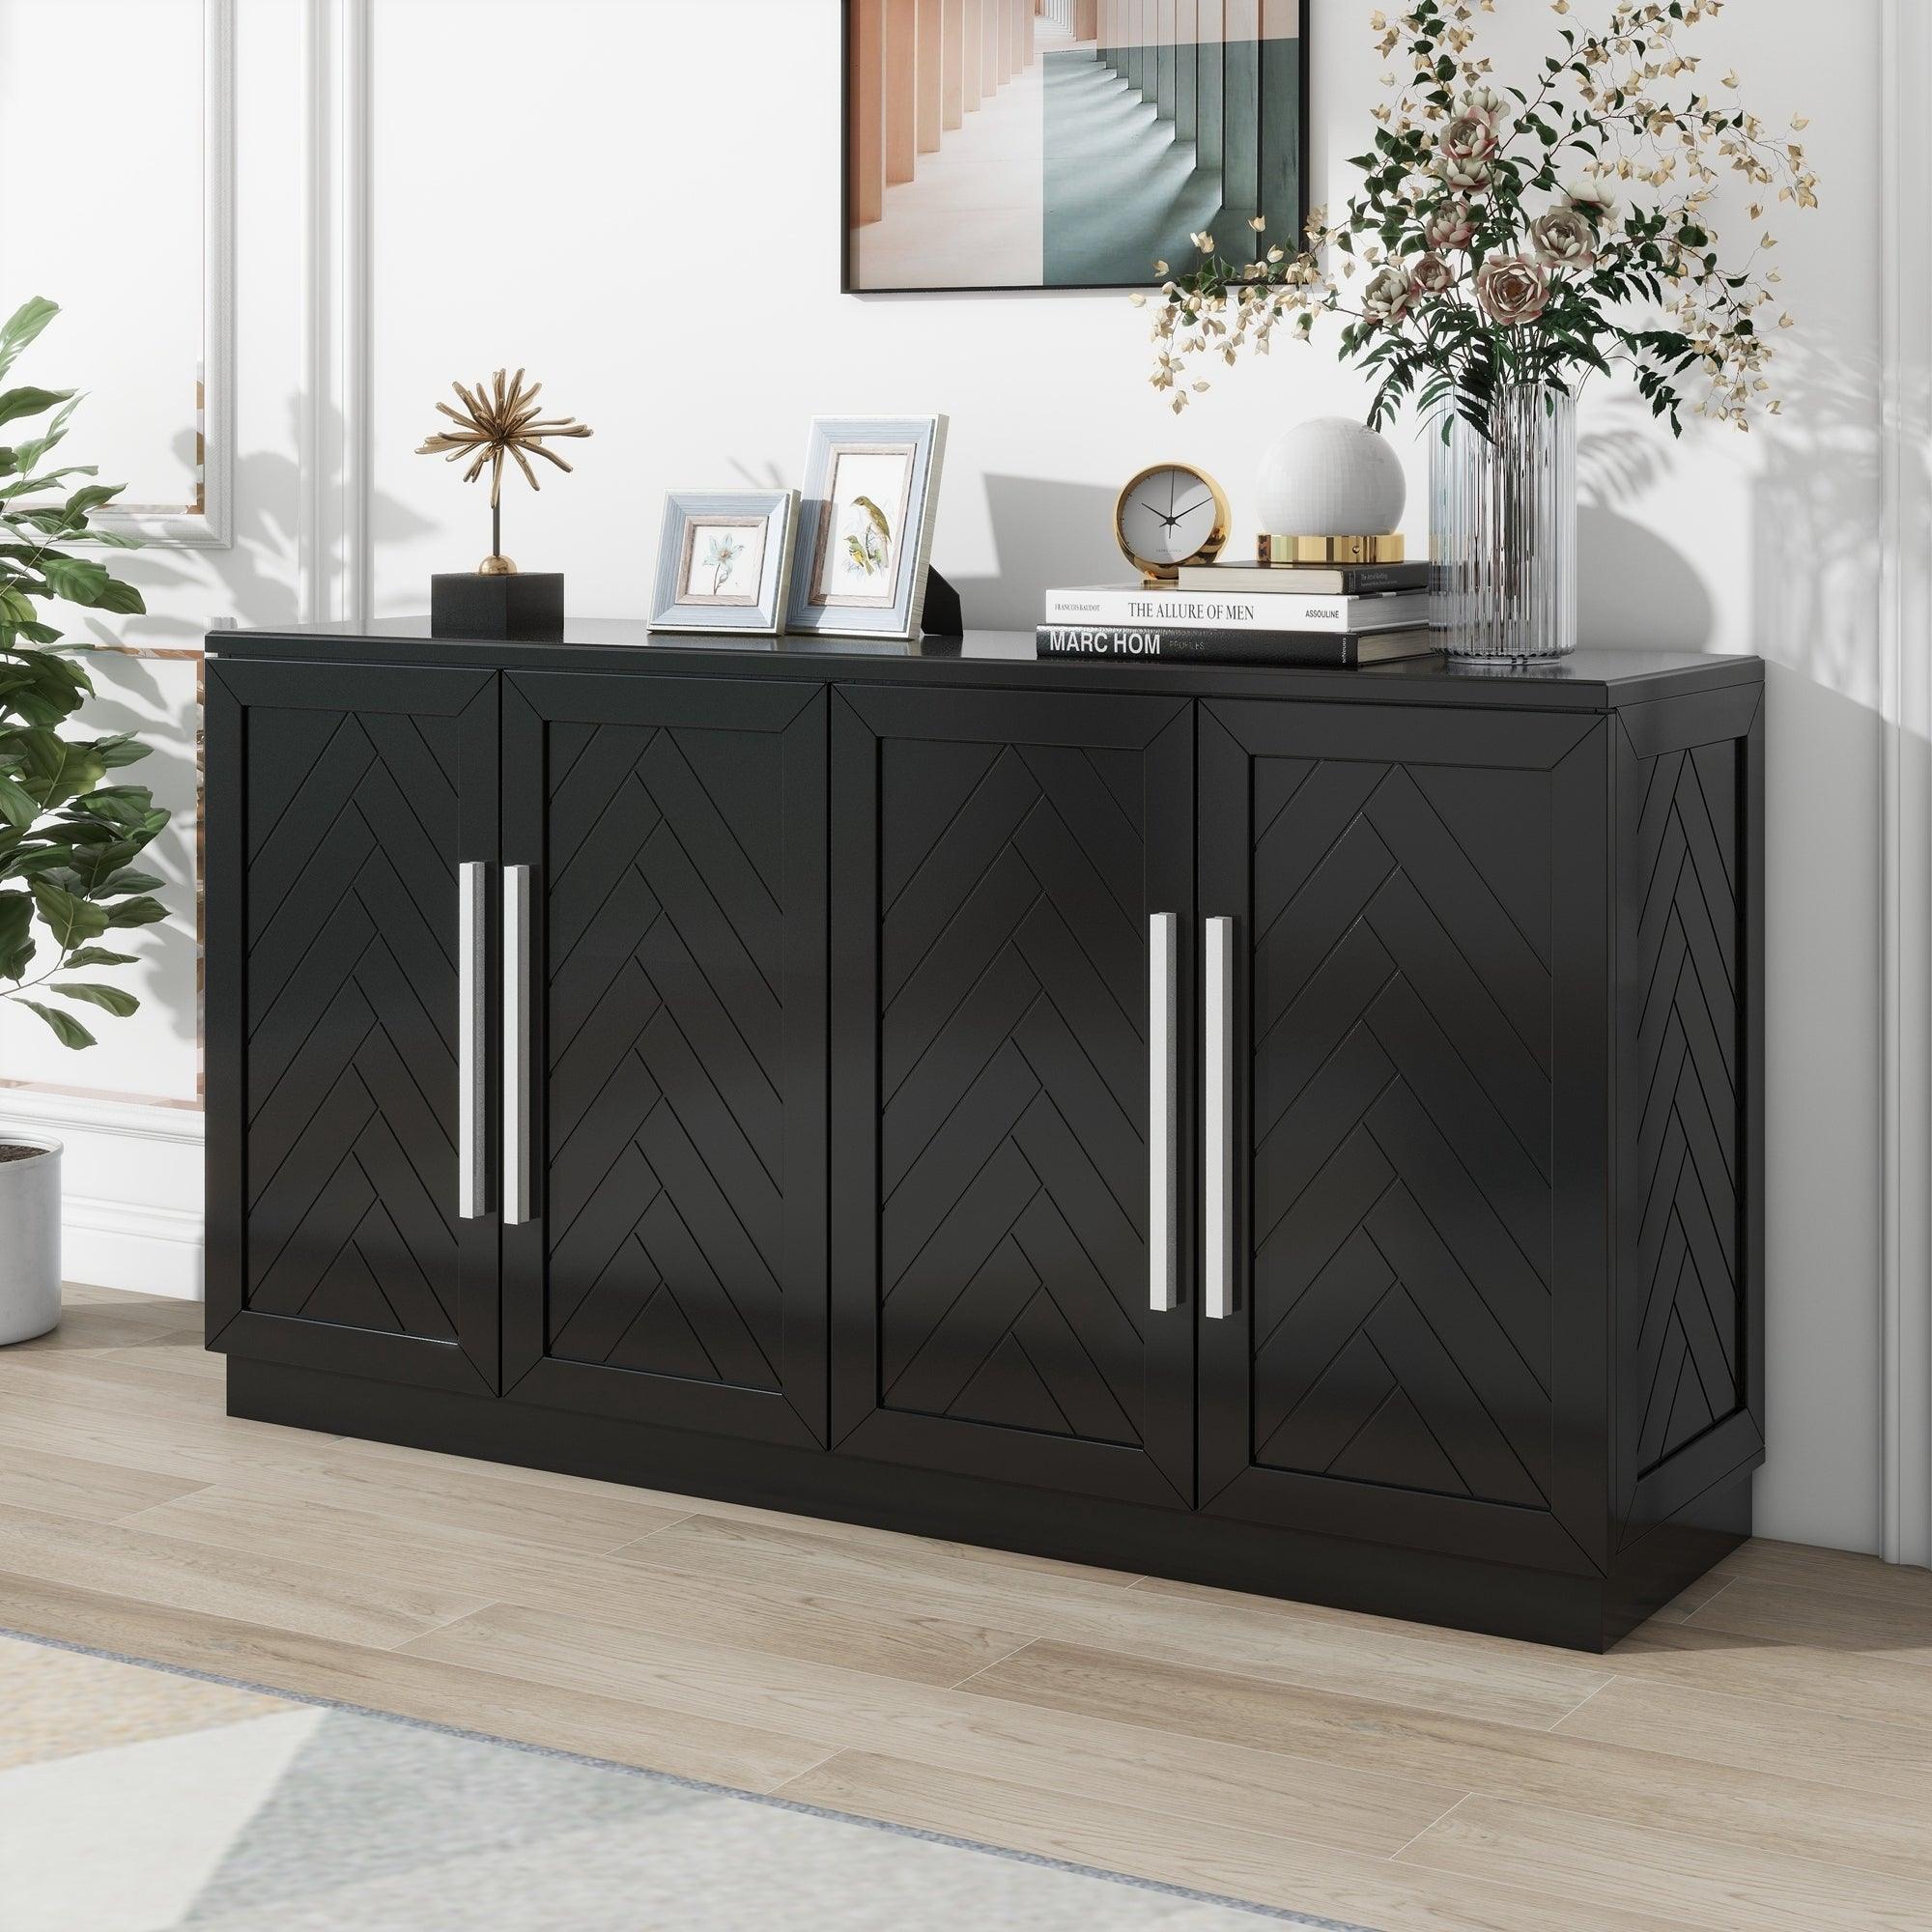 🆓🚛 Sideboard With 4 Doors Large Storage Space Buffet Cabinet With Adjustable Shelves & Silver Handles for Kitchen, Dining Room, Living Room (Black)